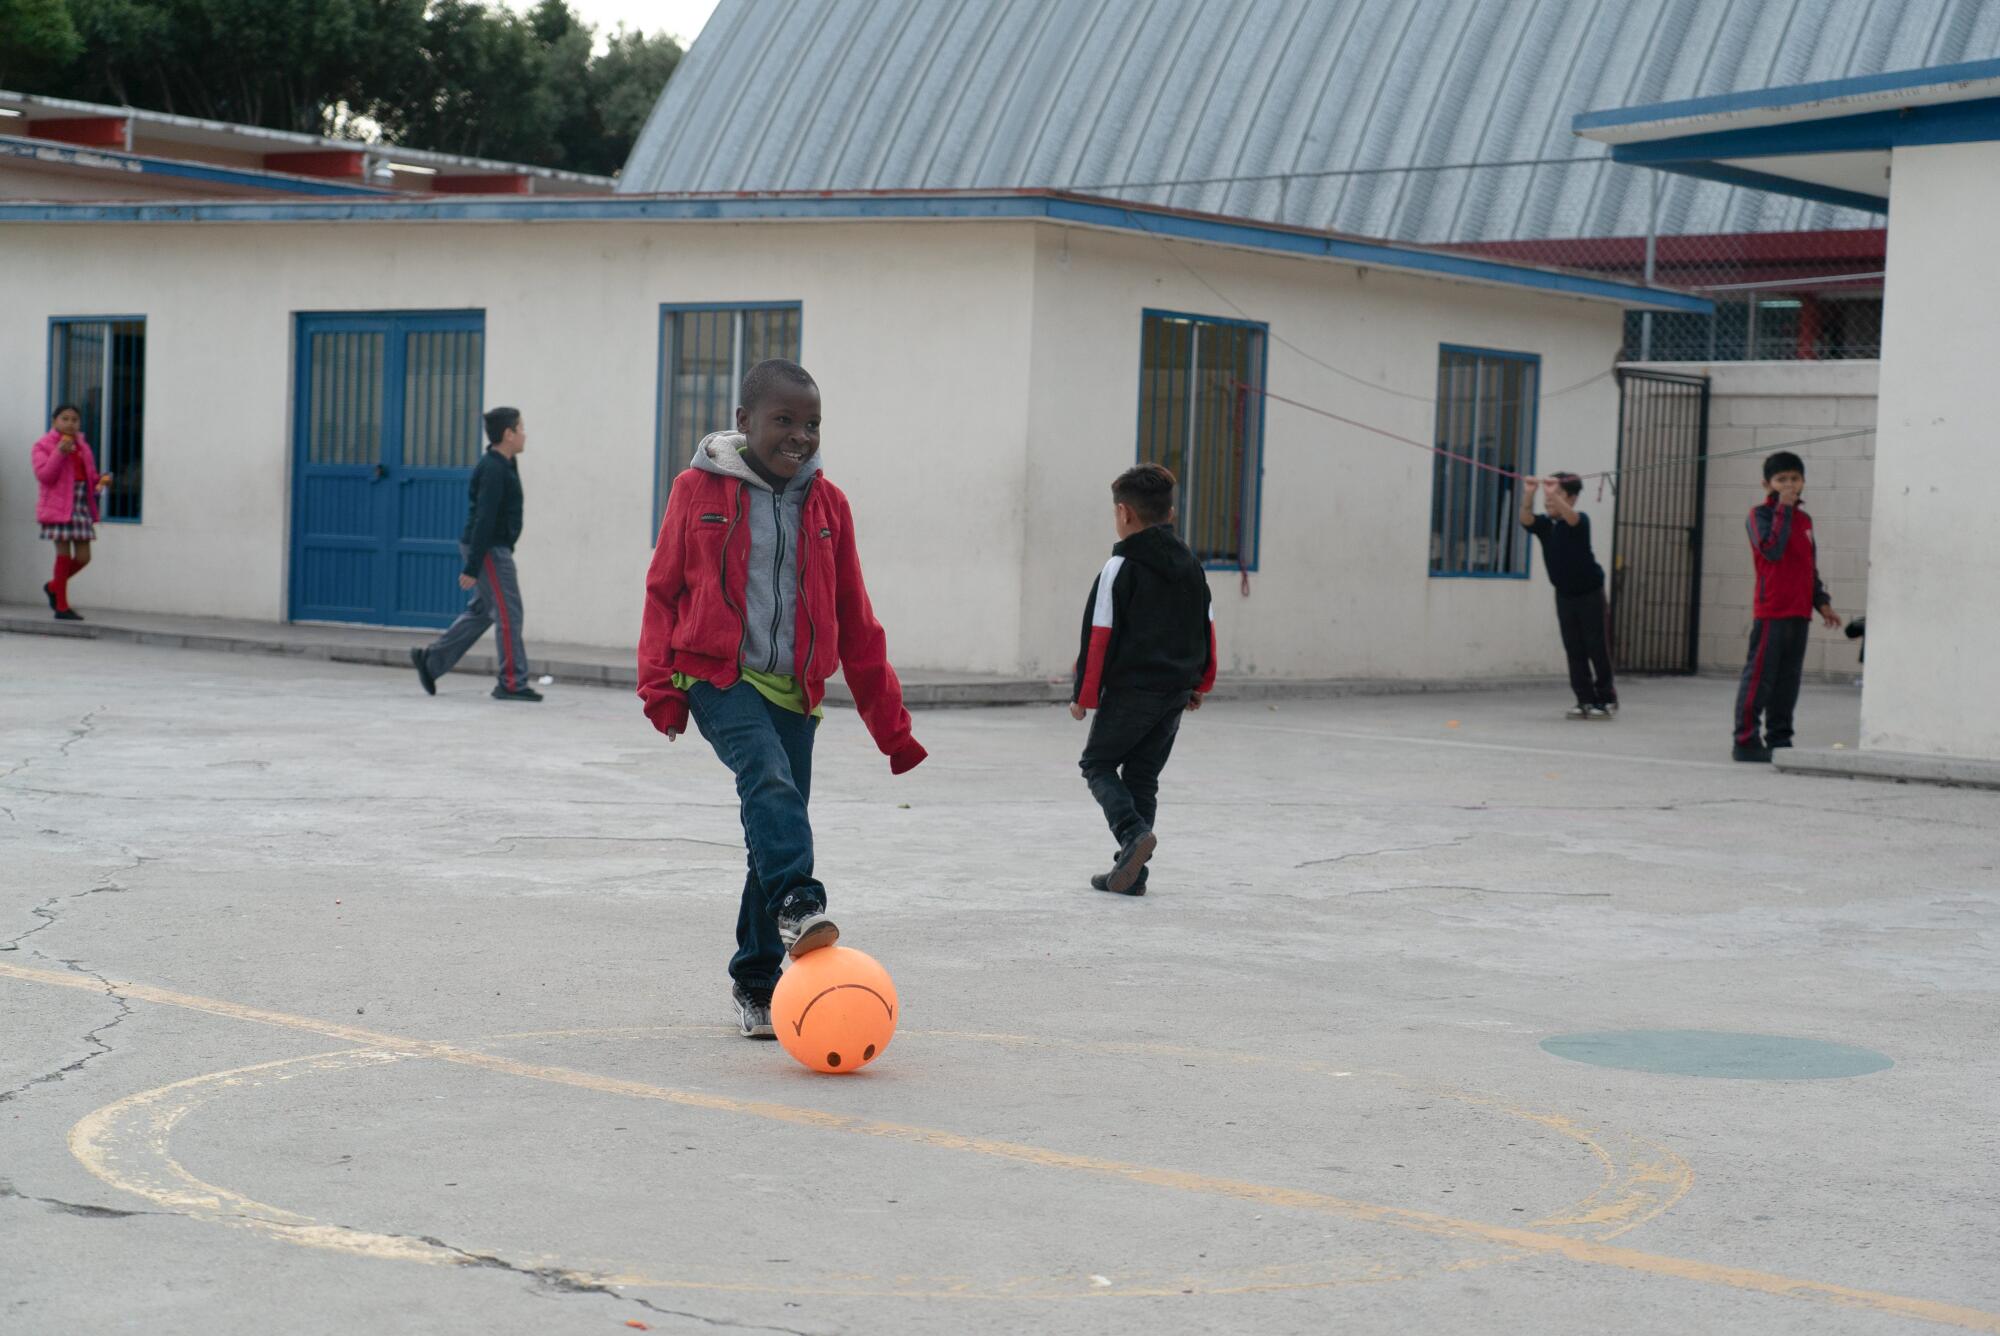 A boy plays soccer during recess.